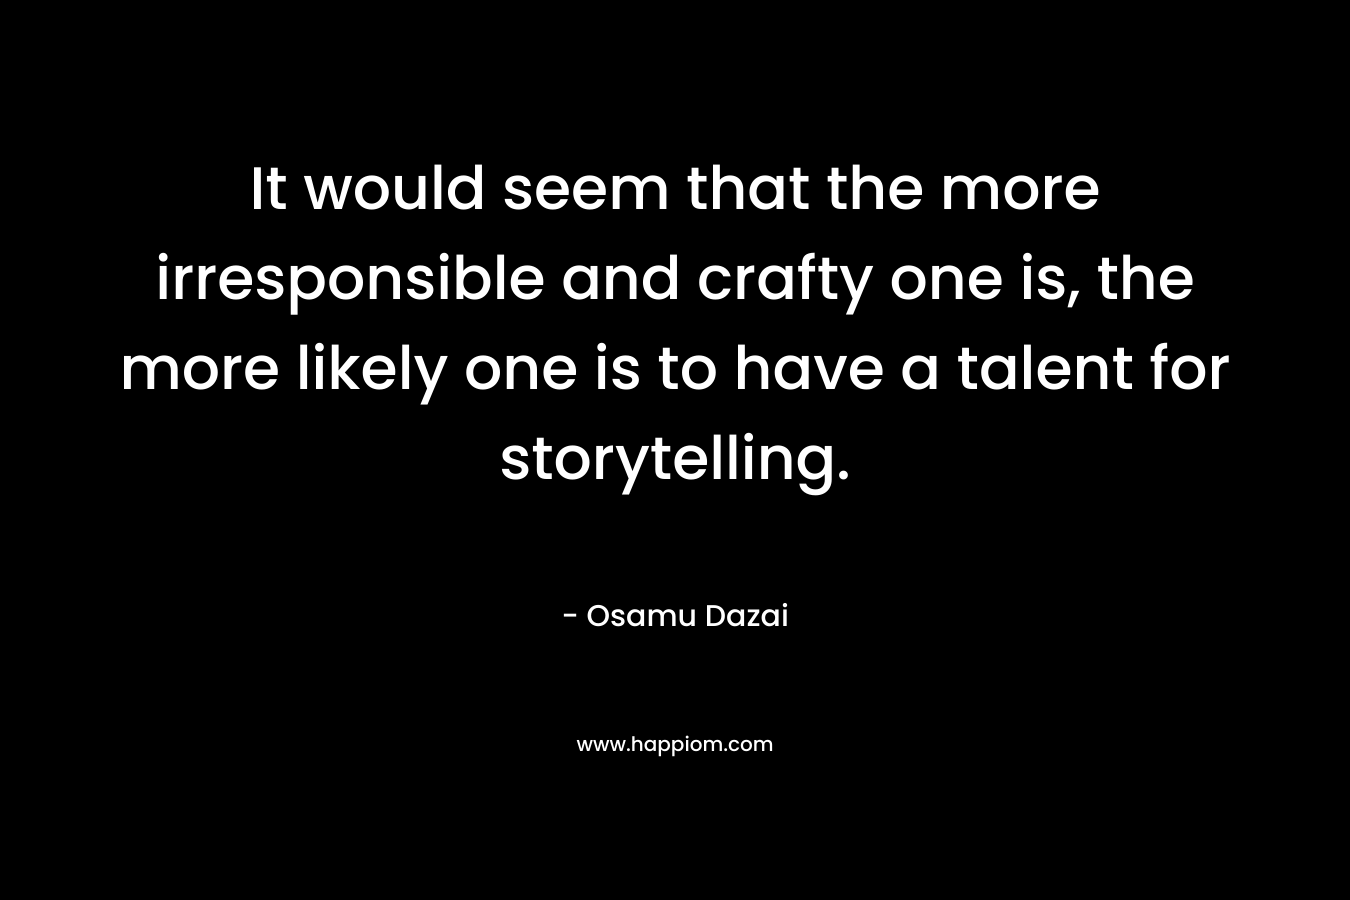 It would seem that the more irresponsible and crafty one is, the more likely one is to have a talent for storytelling. – Osamu Dazai